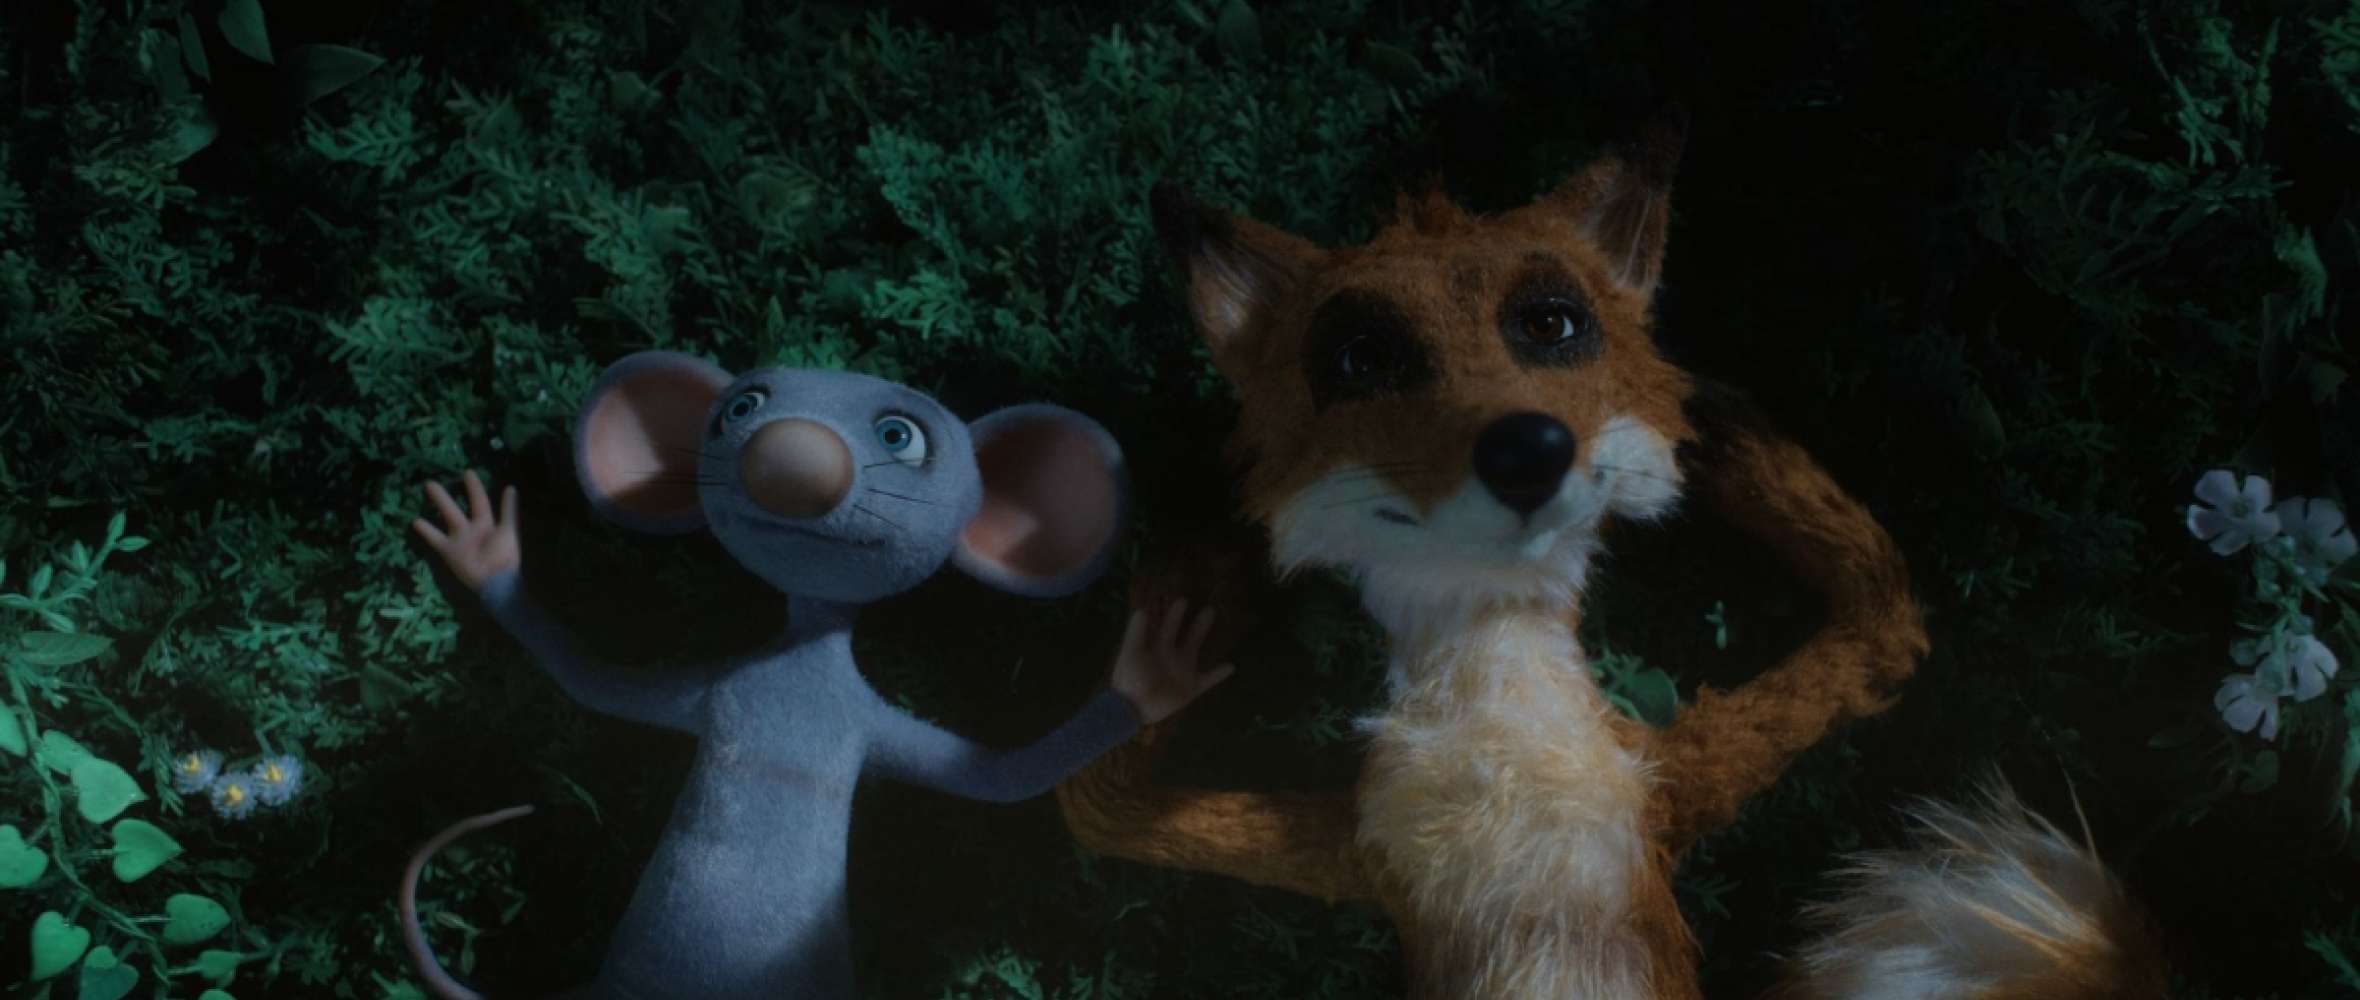 Even Mice Belong in Heaven nominated for the EFA 2021